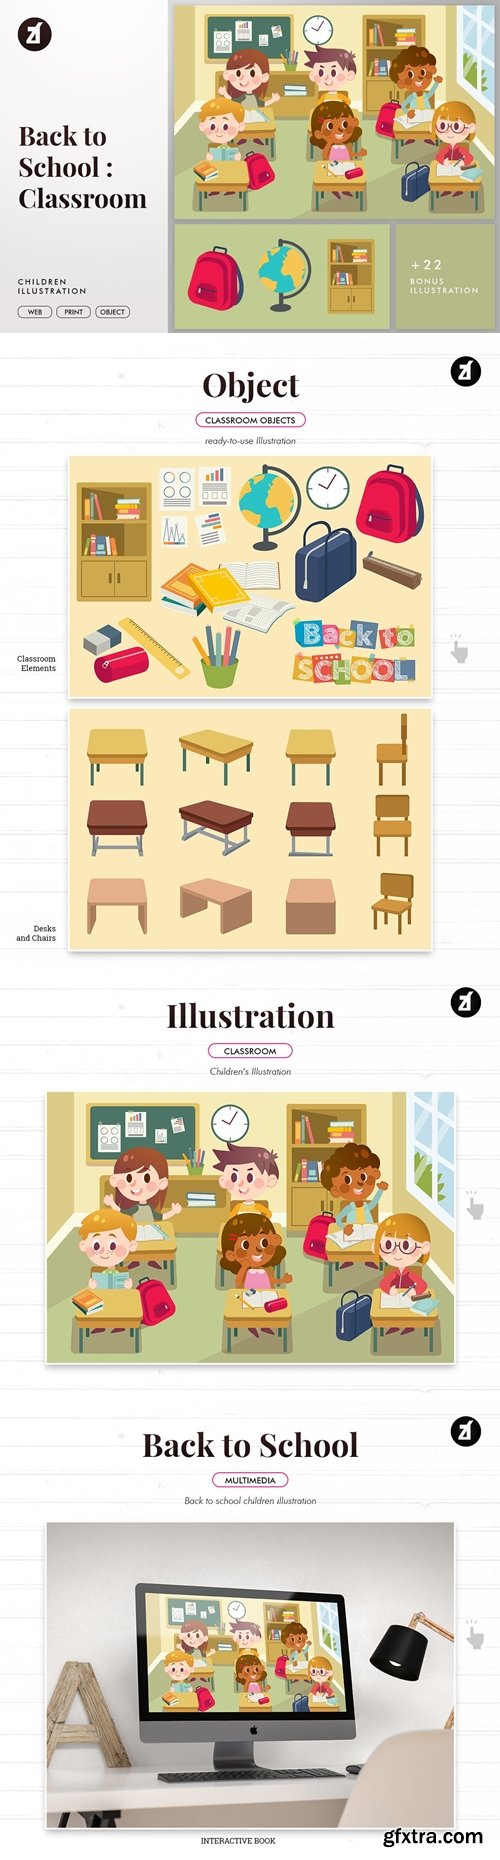 Back to school classroom illustration with objects